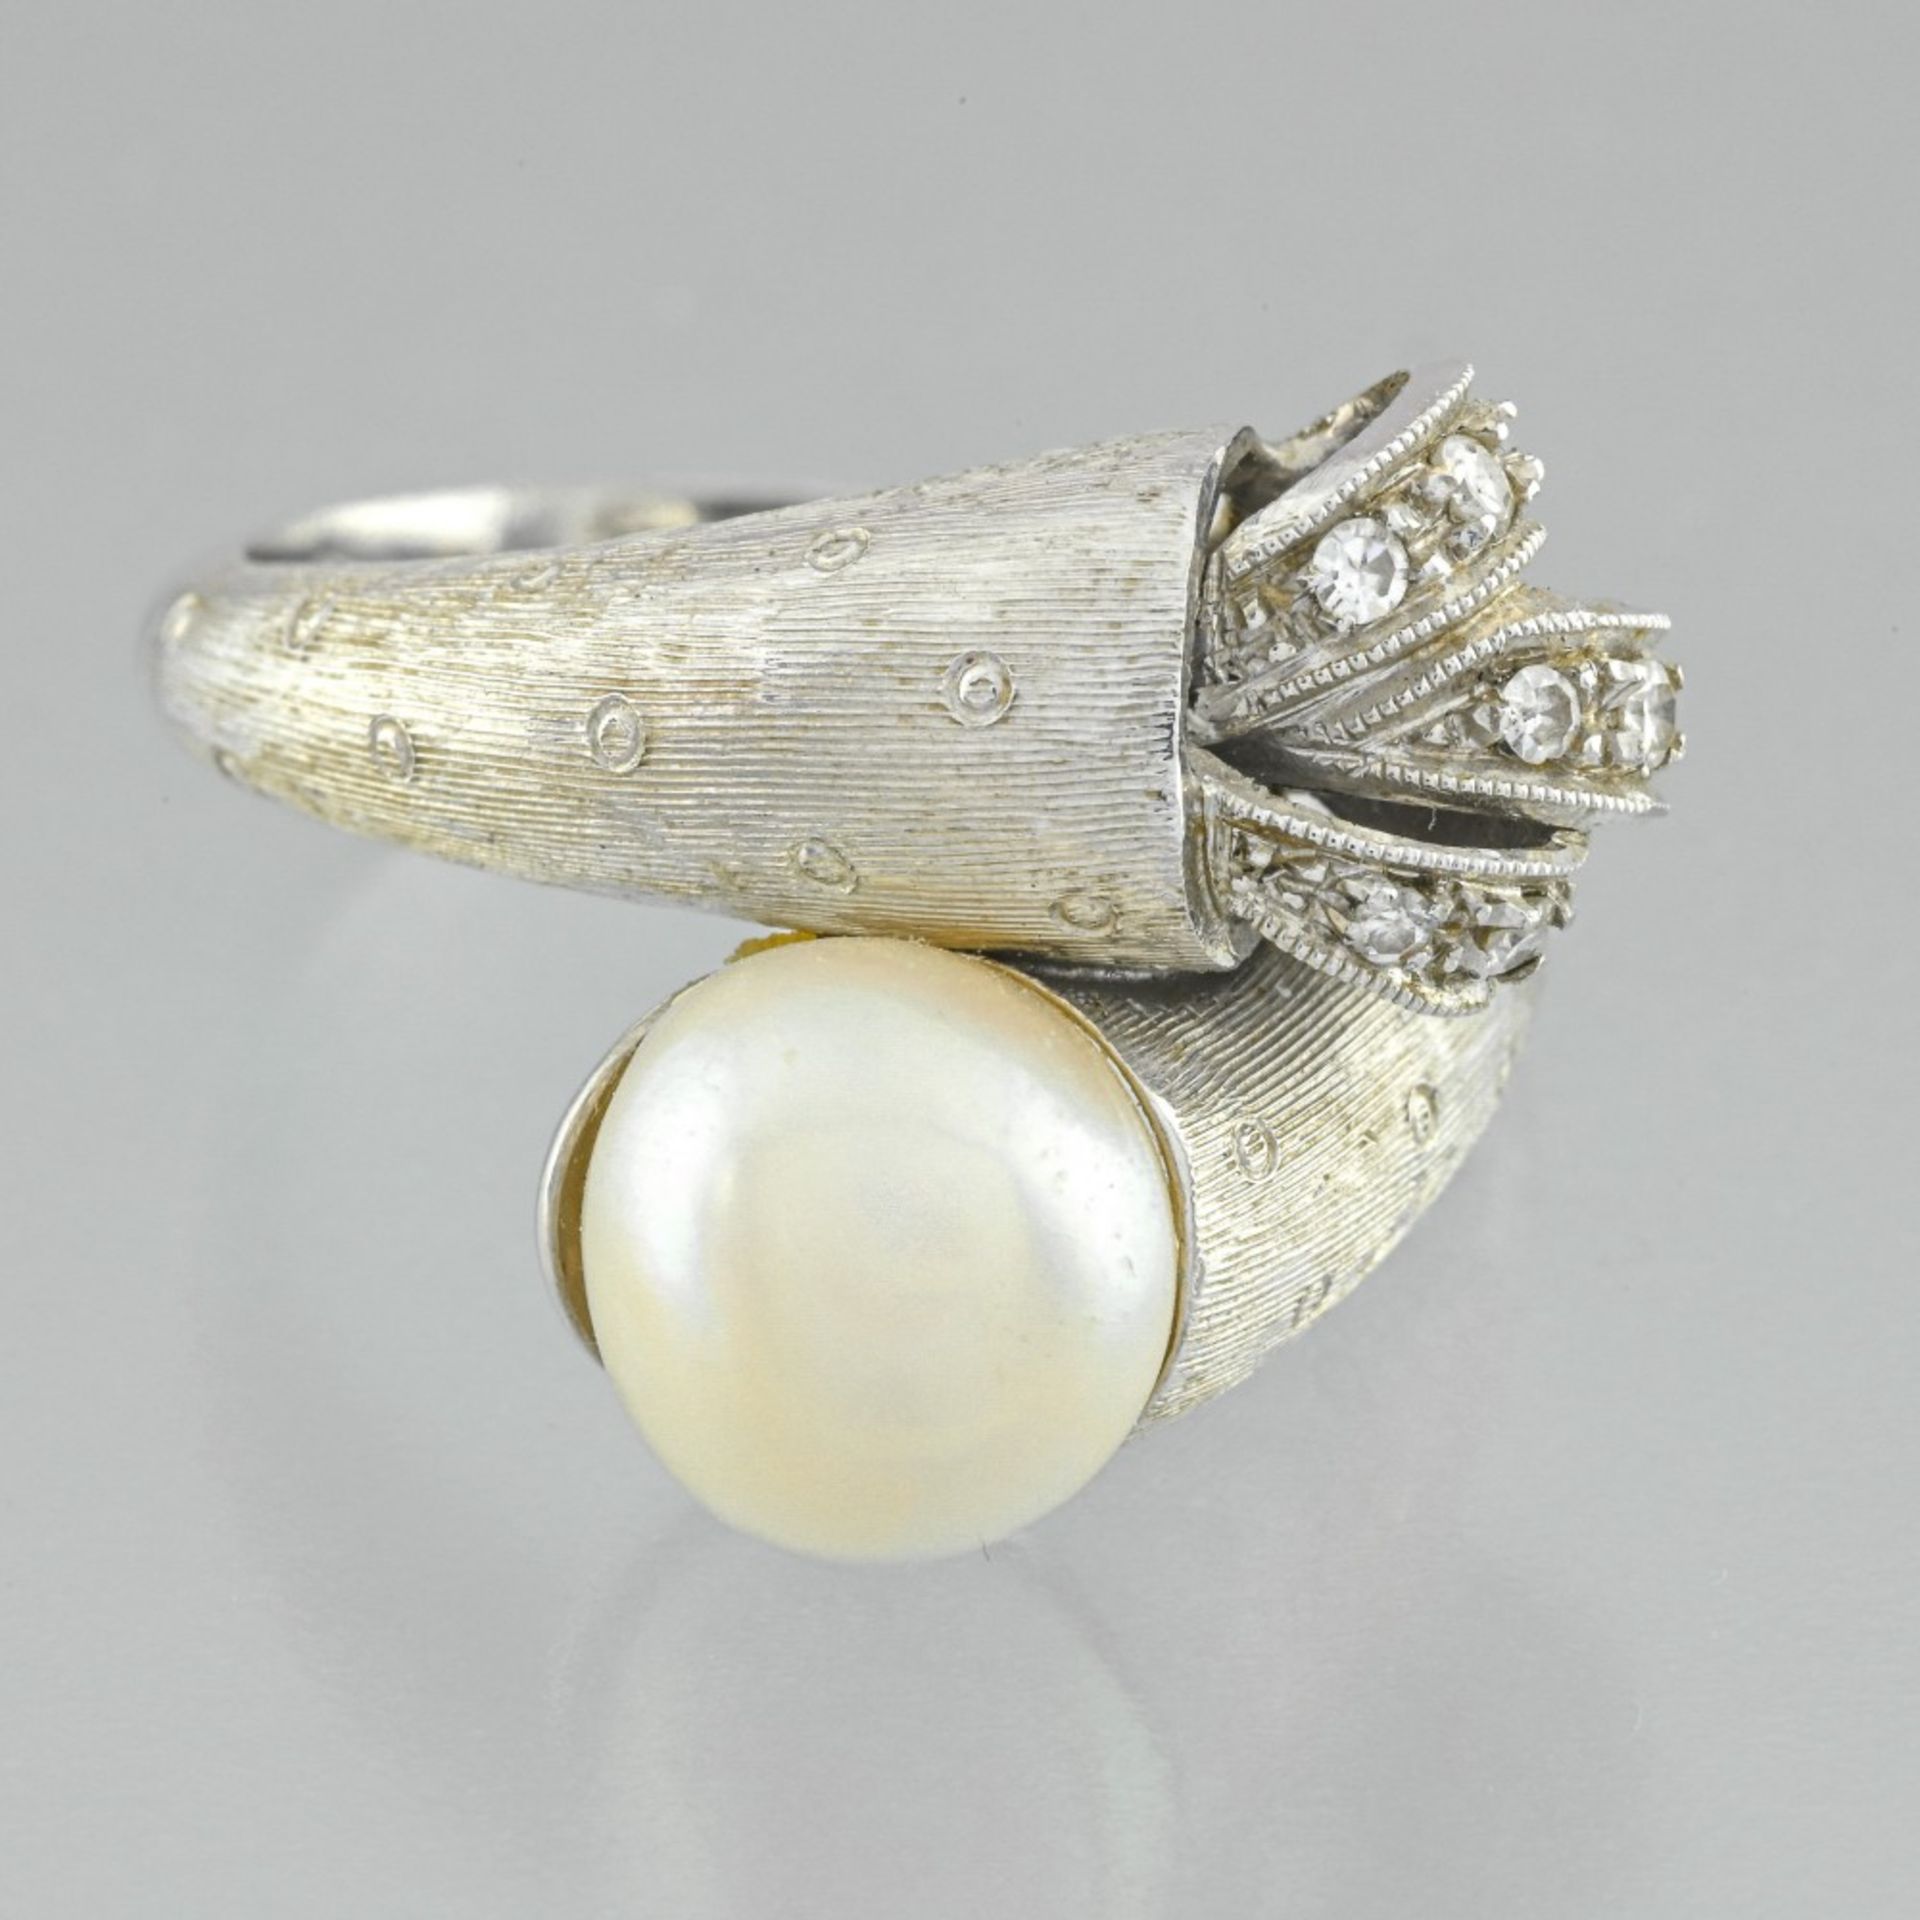 You and me ring pearl and diamond in white gold 18 Karat, set with a white pearl of 8 mm diameter - Image 2 of 3